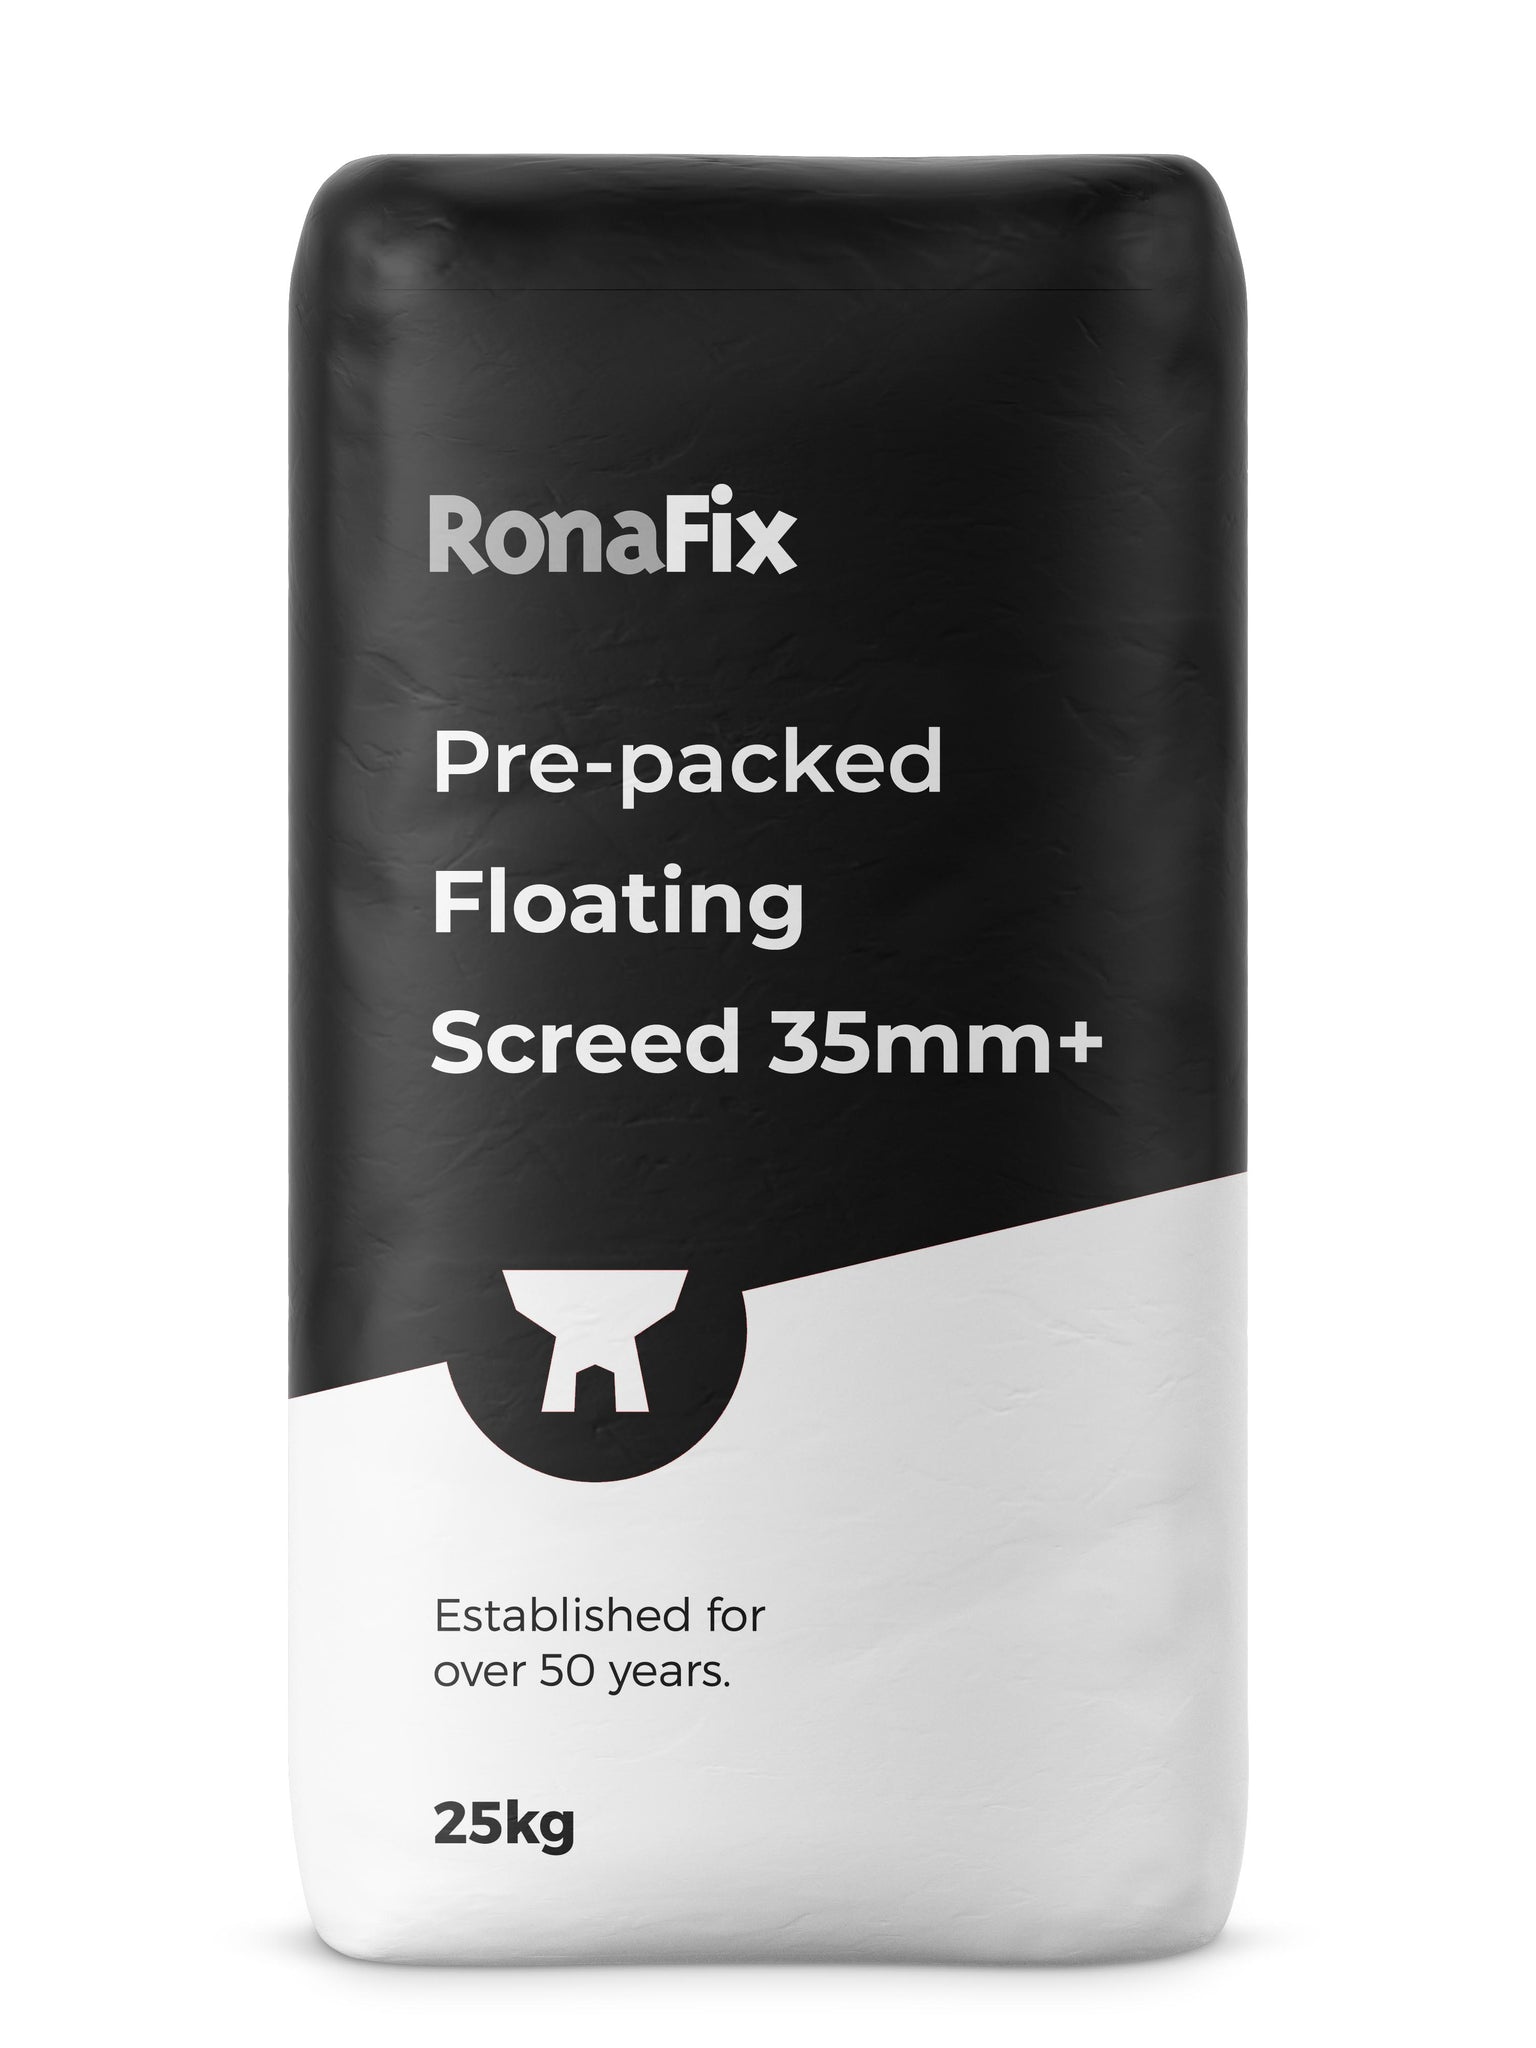 Ronafix Pre-packed Floating Screed 35mm+